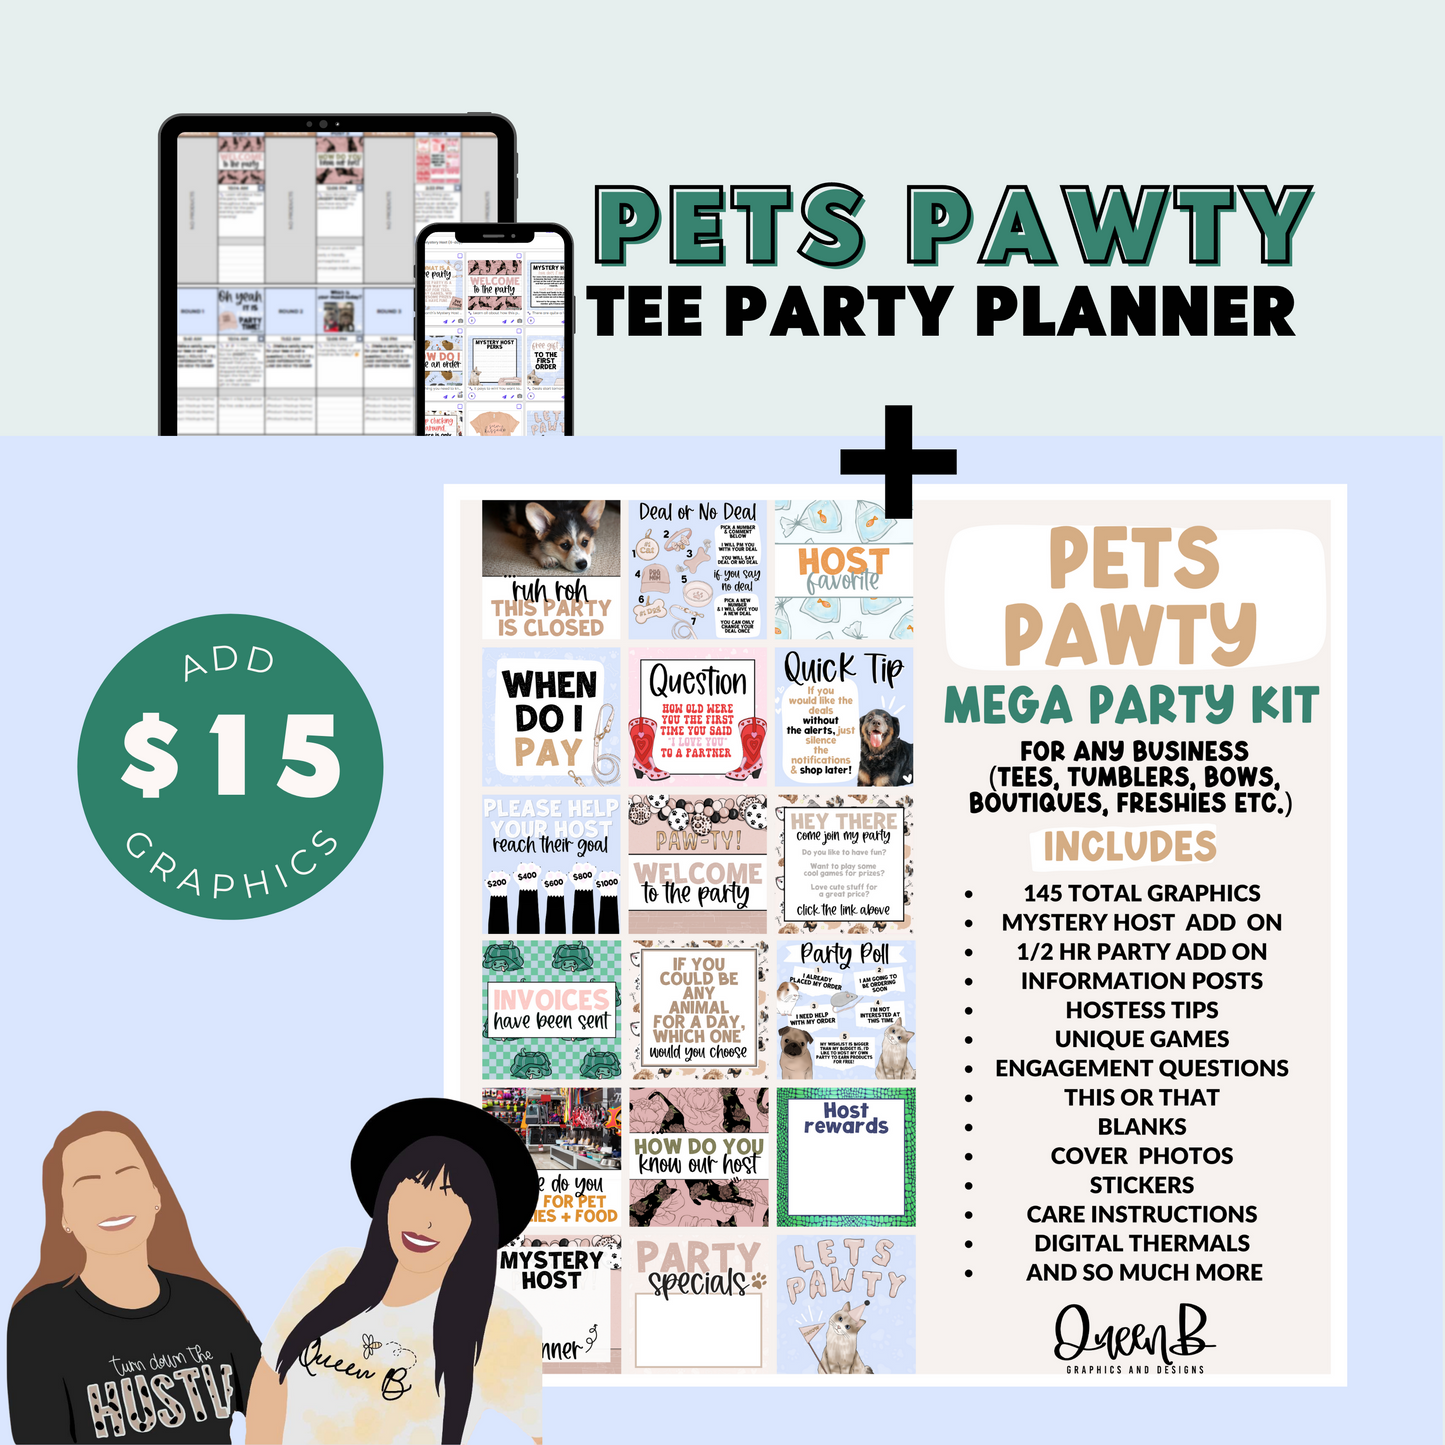 Pets Pawty Tee Party Planner for the pet lovers | Sun Kissed Virtual Assistant